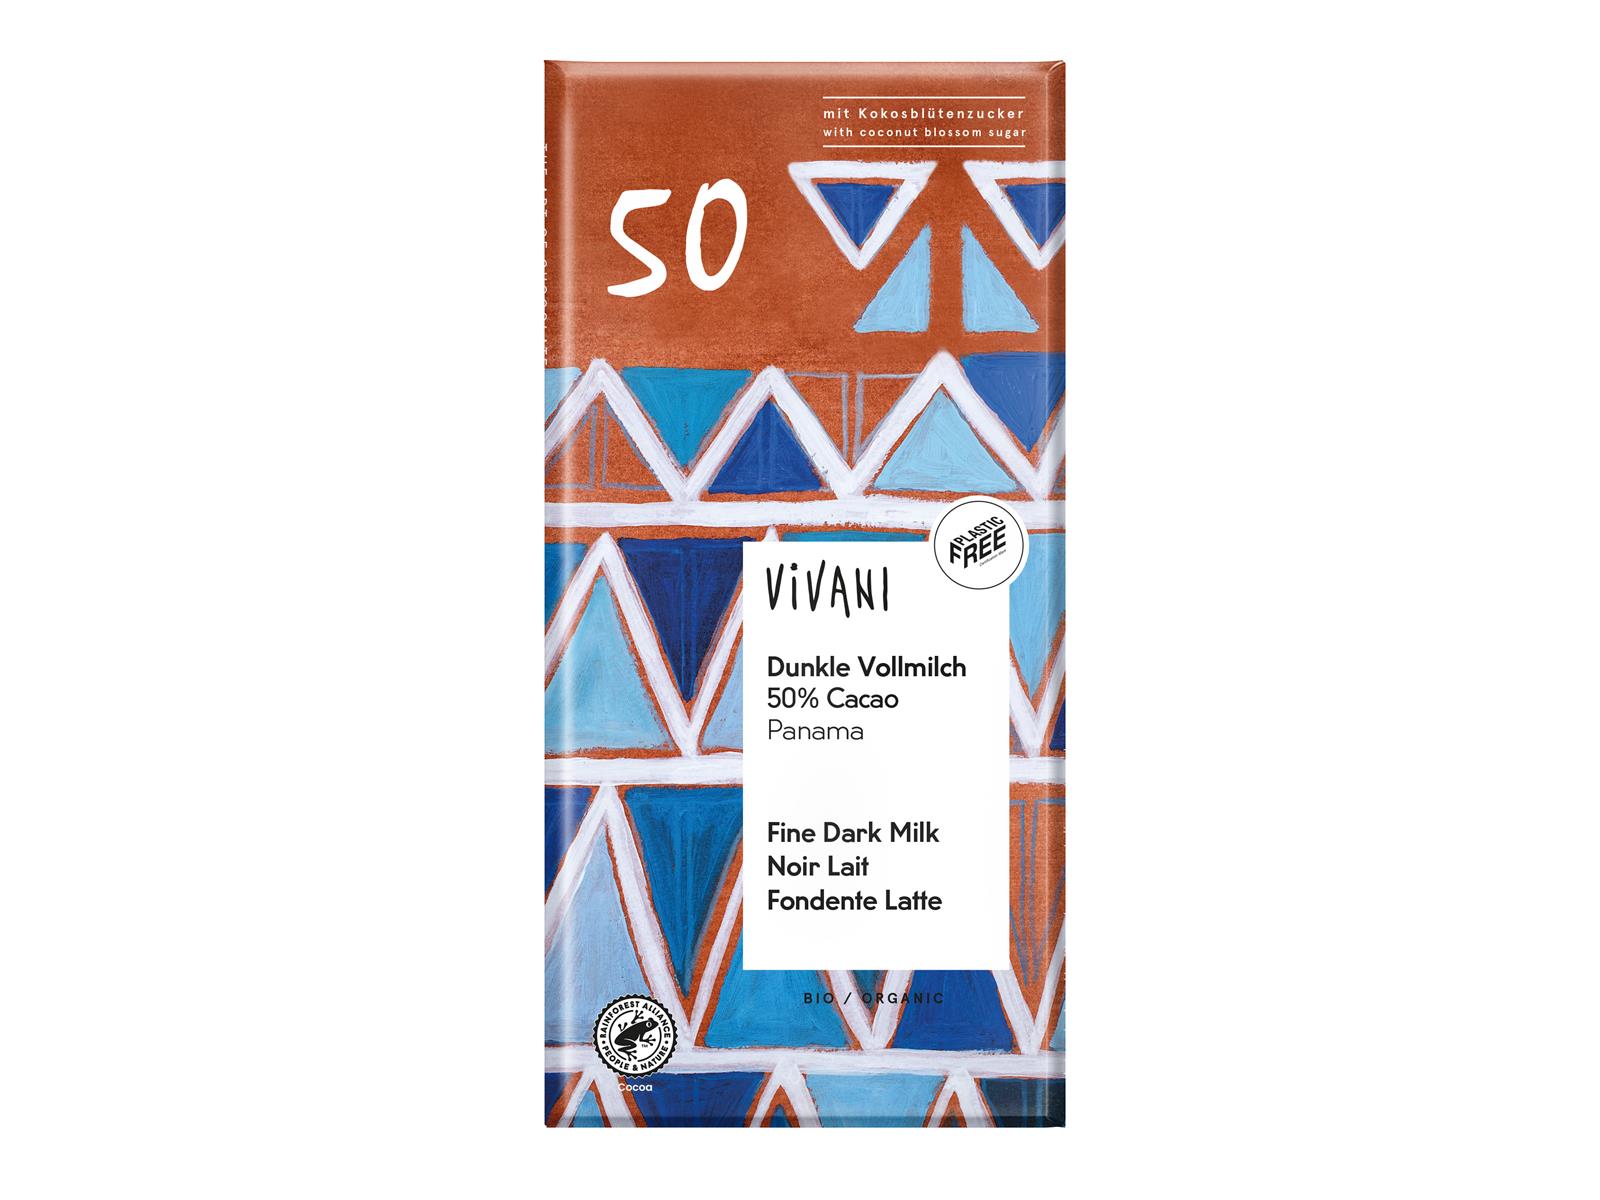 Vivani Dunkle Vollmilch 50% Cacao Panama 80g